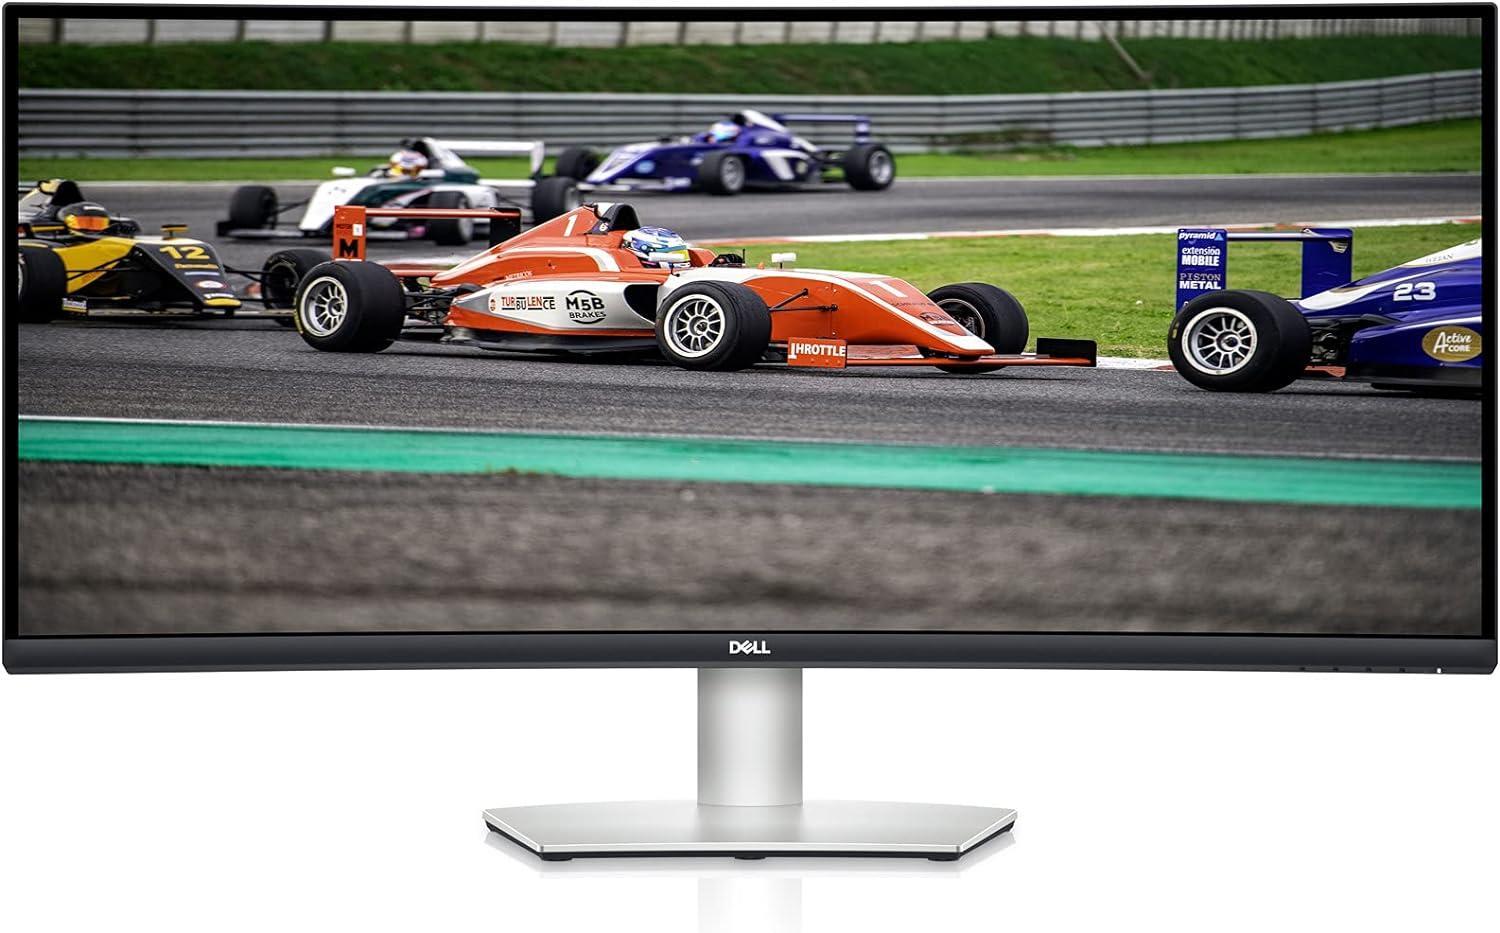 Dell S3422DW Curved Monitor - 34-inch WQHD (3440 x 1440) Display, 1800R Curved Screen, Built-in Dual 5W Speakers, 4ms Grey-to-Grey Response Time, 16.7 Million Colors - Silver